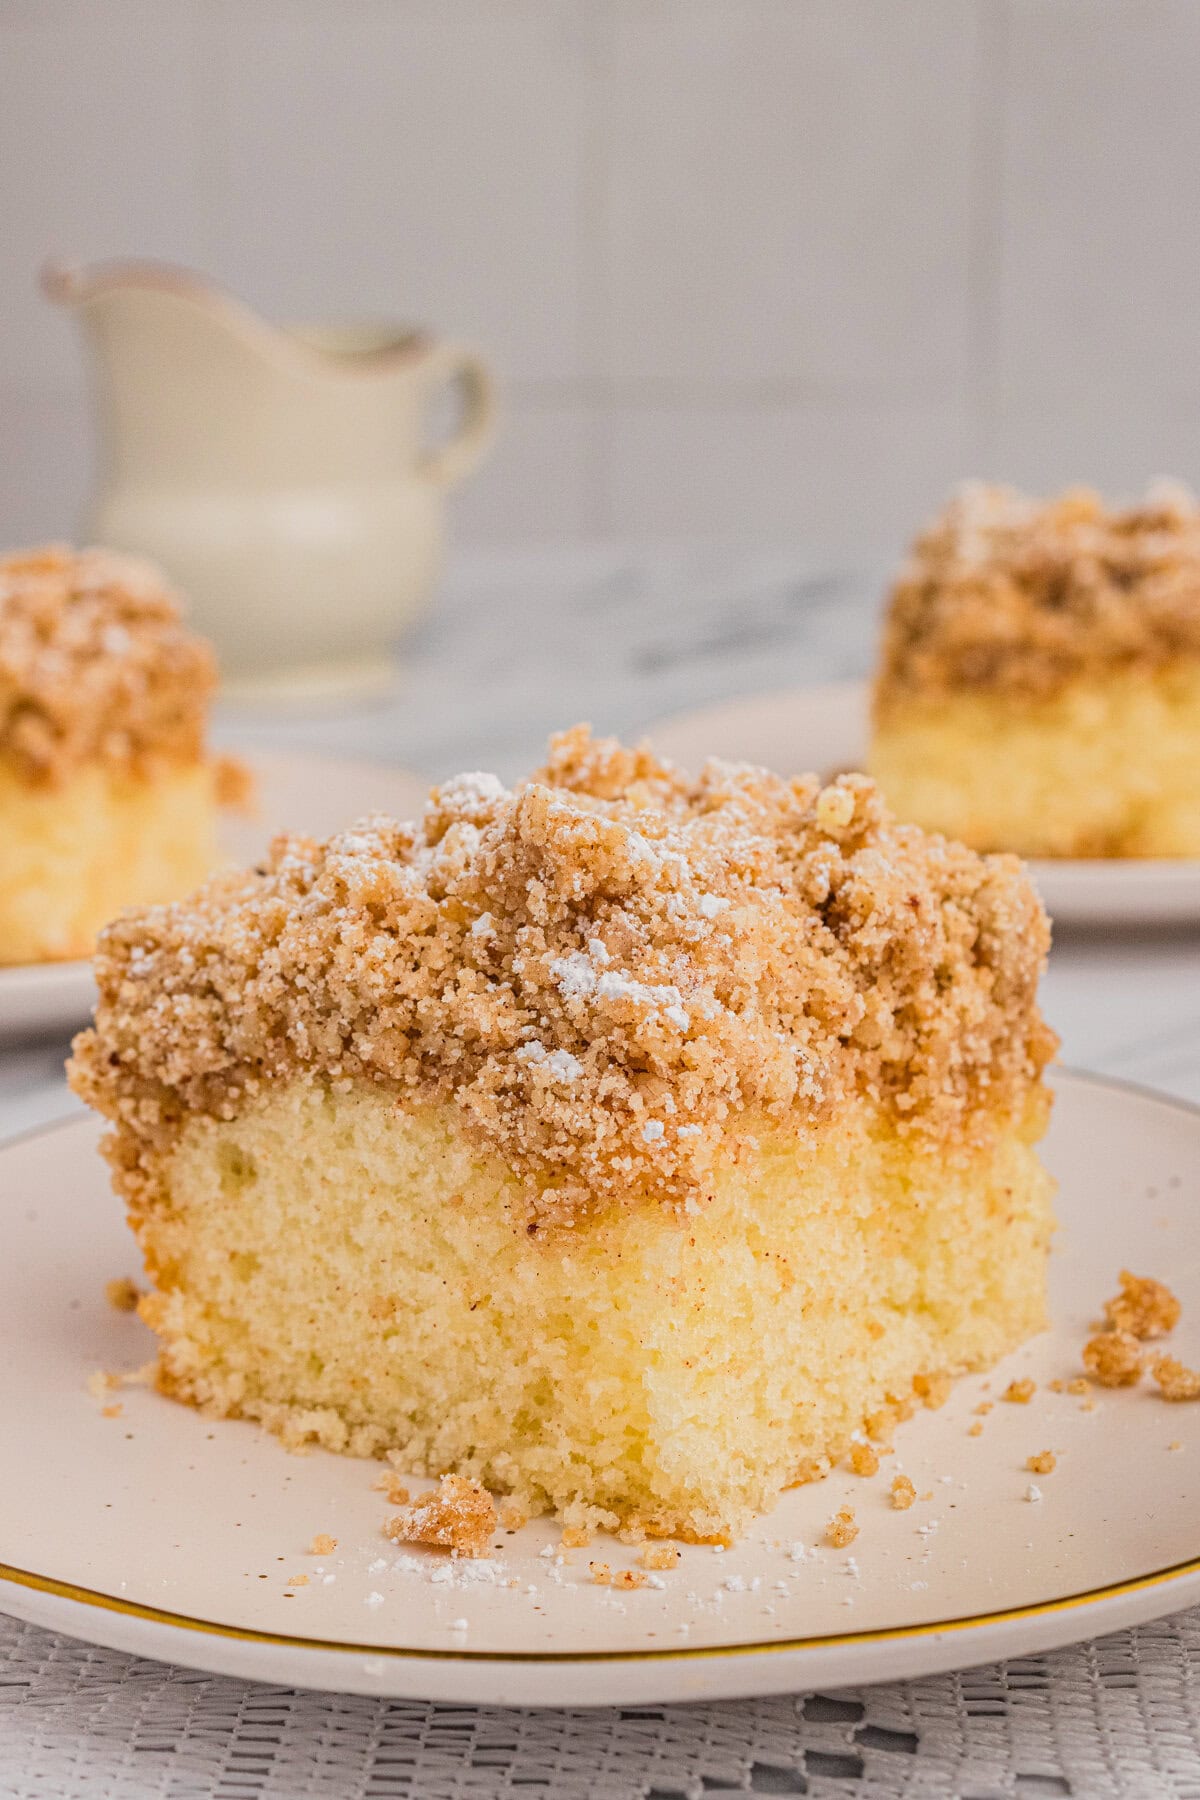 Slice of crumb cake with corner facing the camera and a teapot in the background.